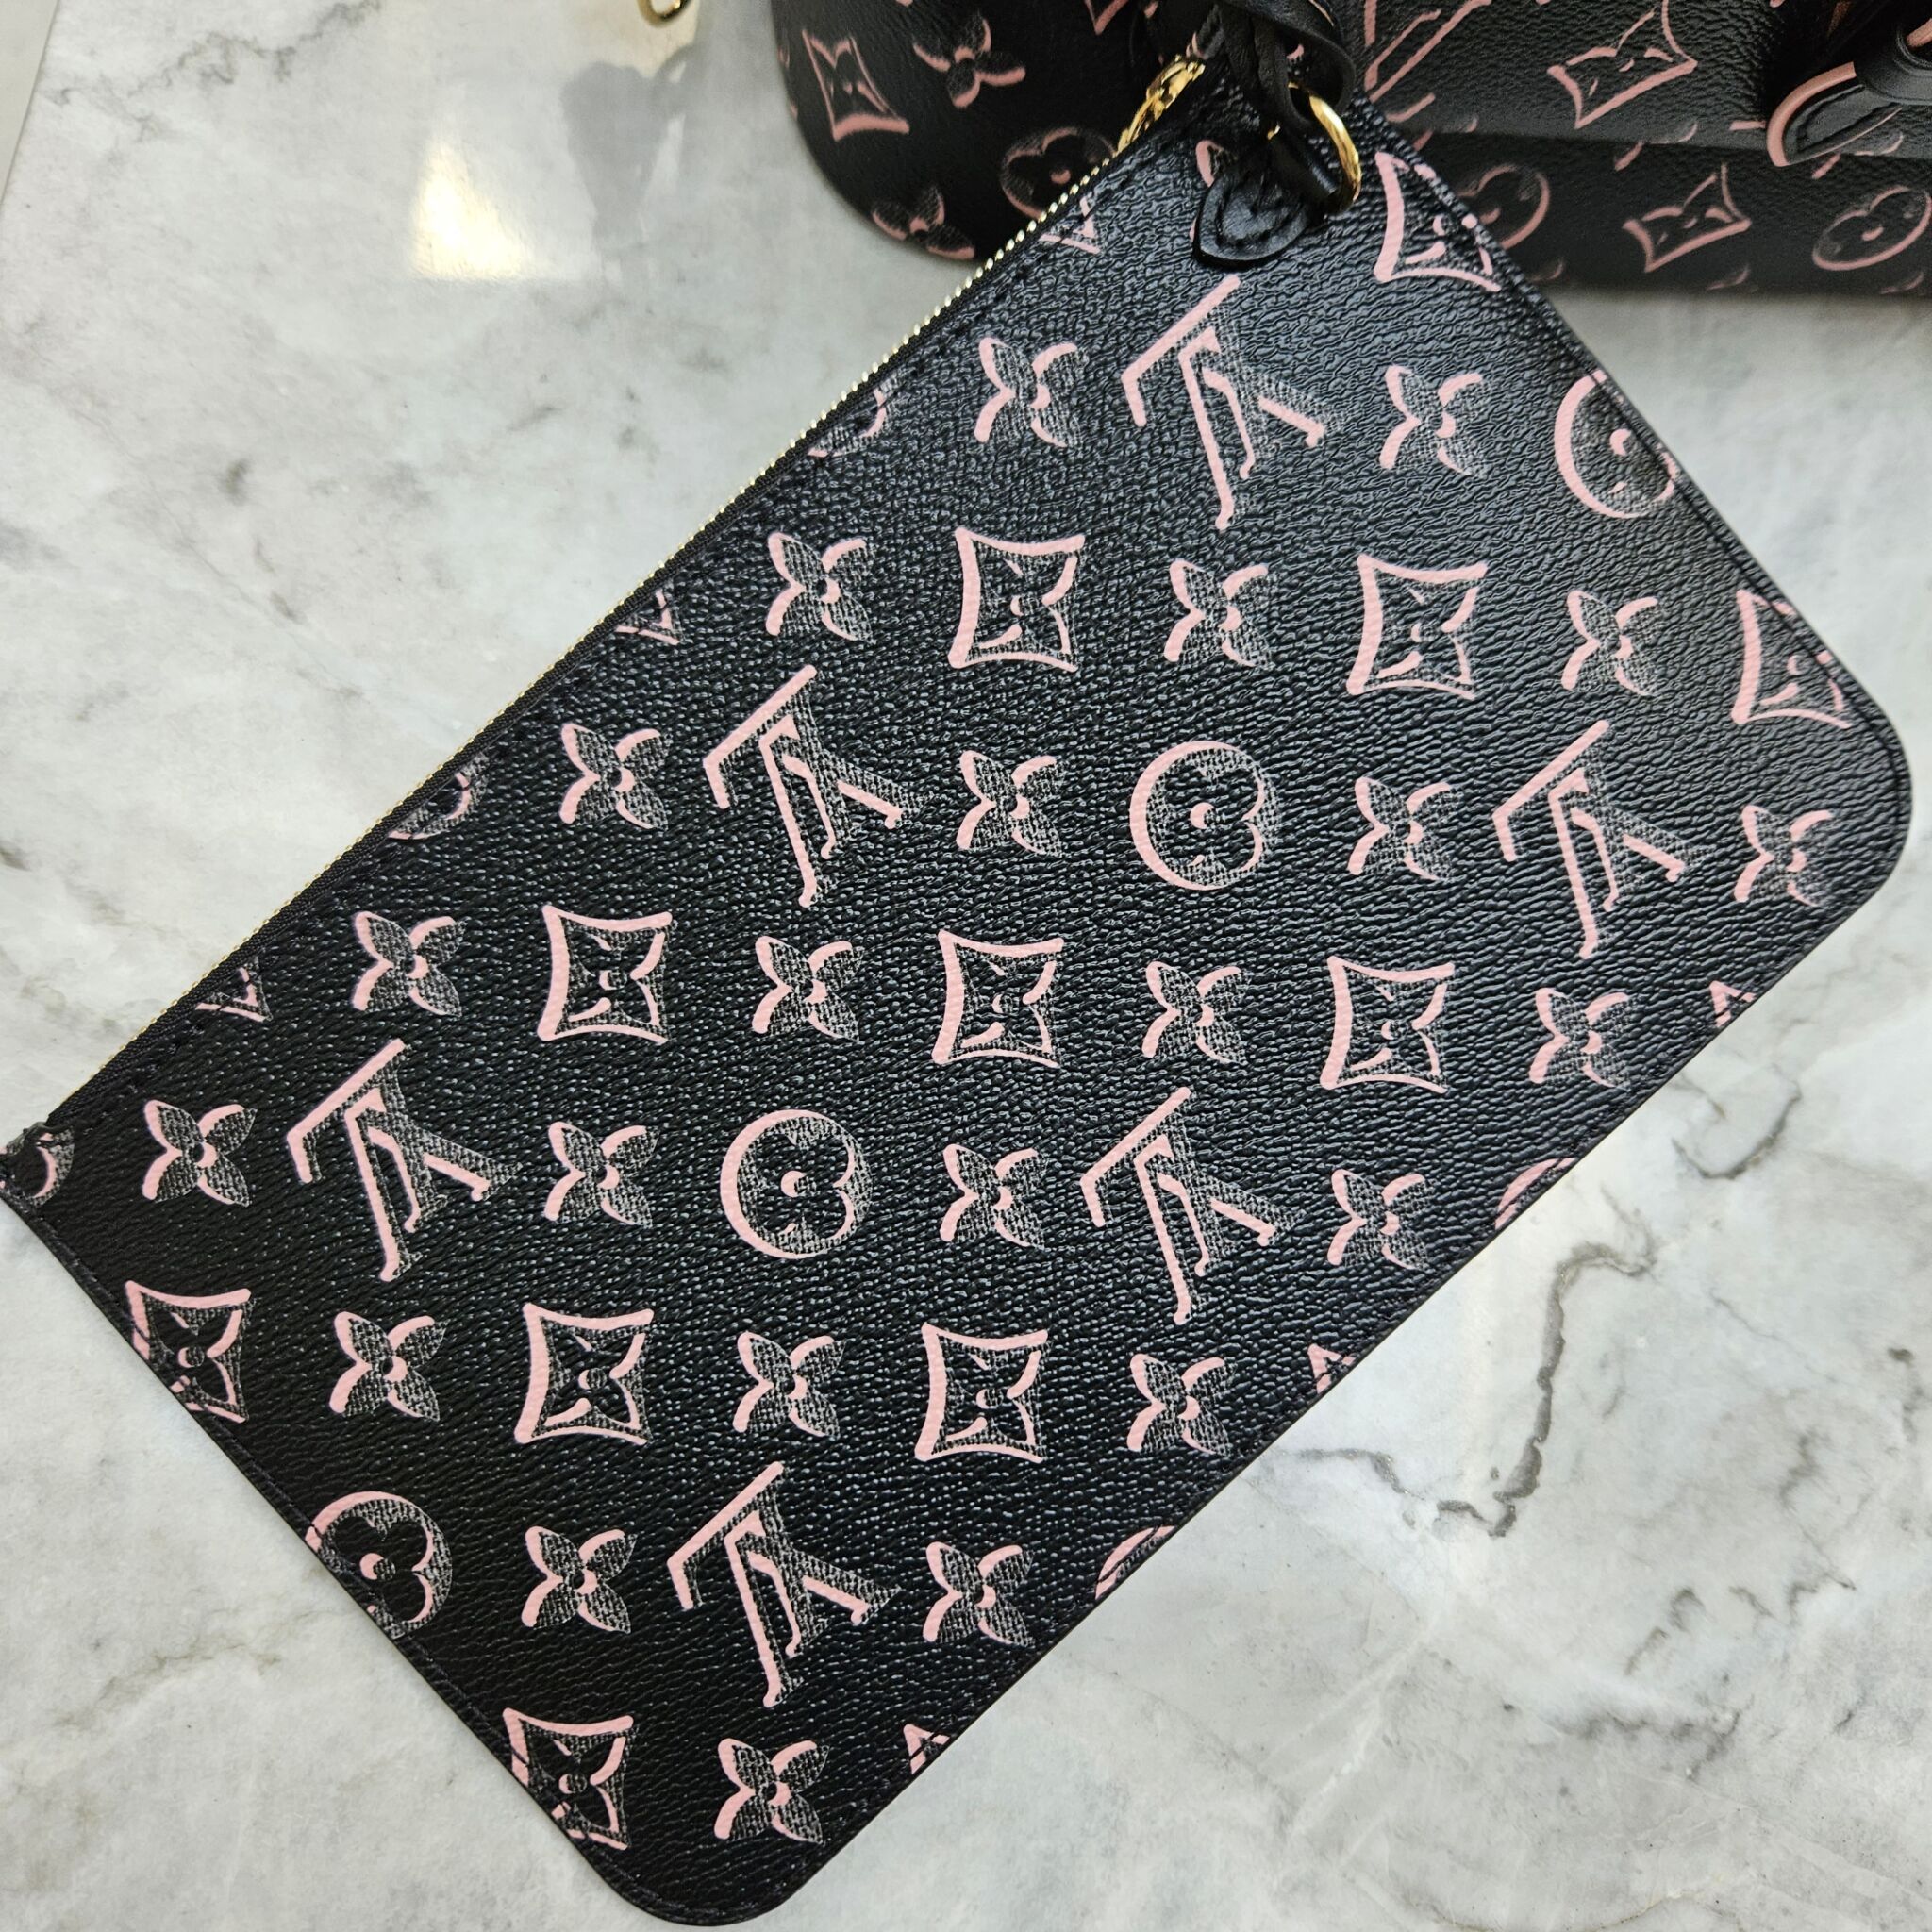 Louis Vuitton Black Pink Monogram Canvas Fall For You Neverfull MM, myGemma, SG